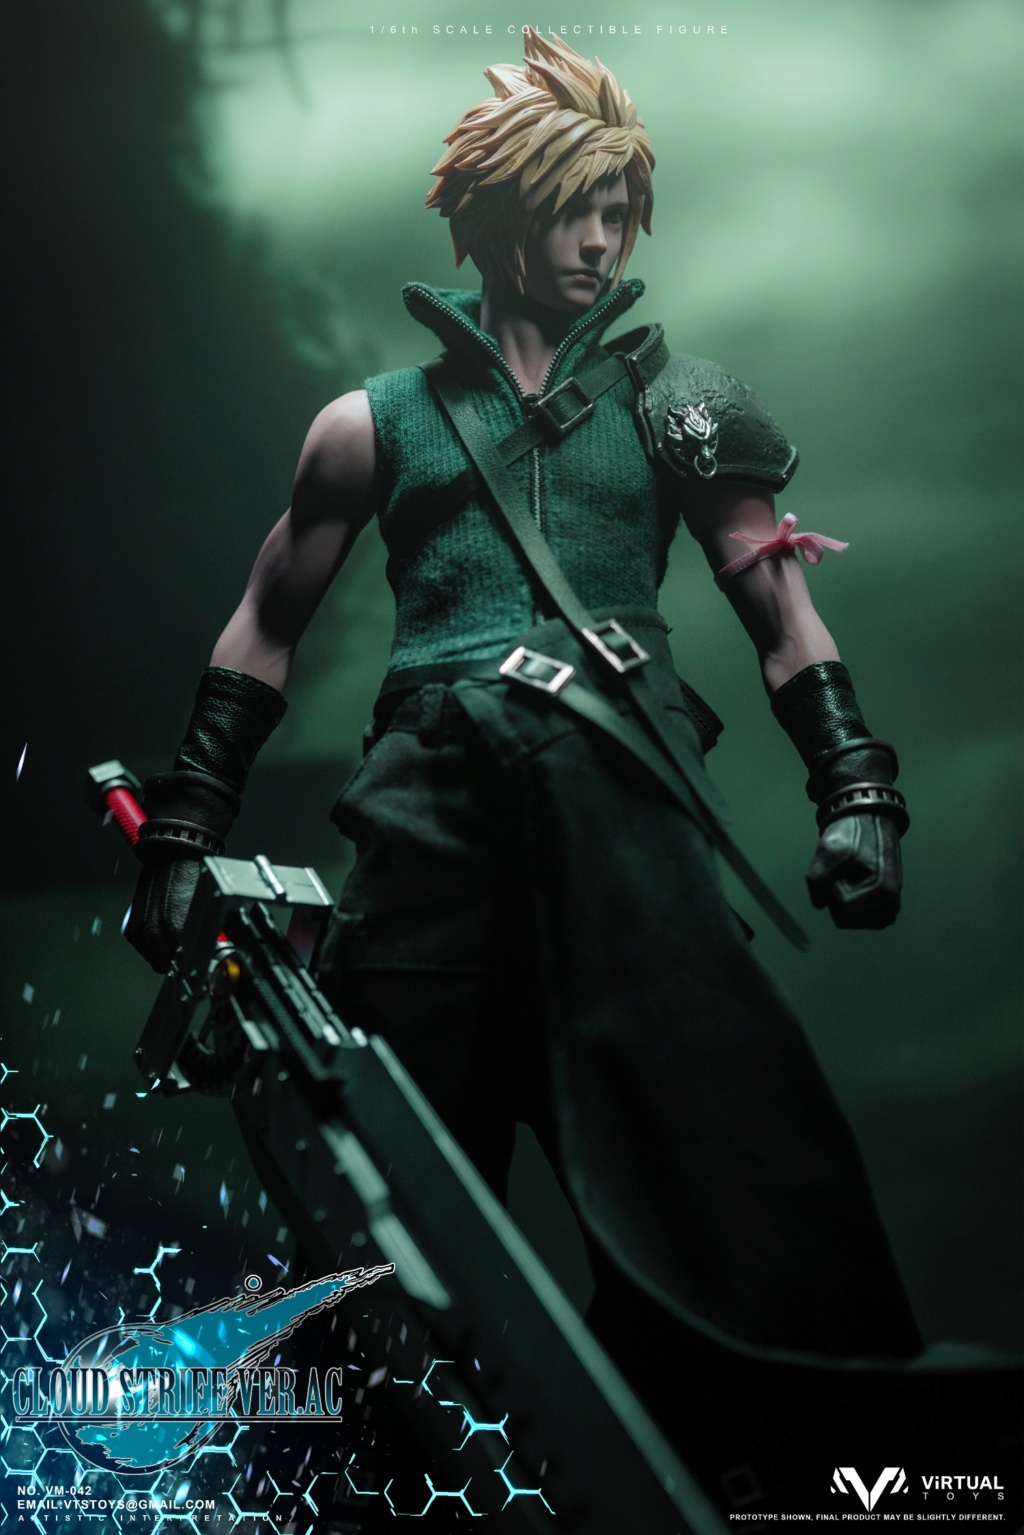 CloudStrife - NEW PRODUCT: VTSTOYS: 1/6 Original Level 1 Warrior AC Edition Normal Edition and Collector's Edition (vm-042) 13075010